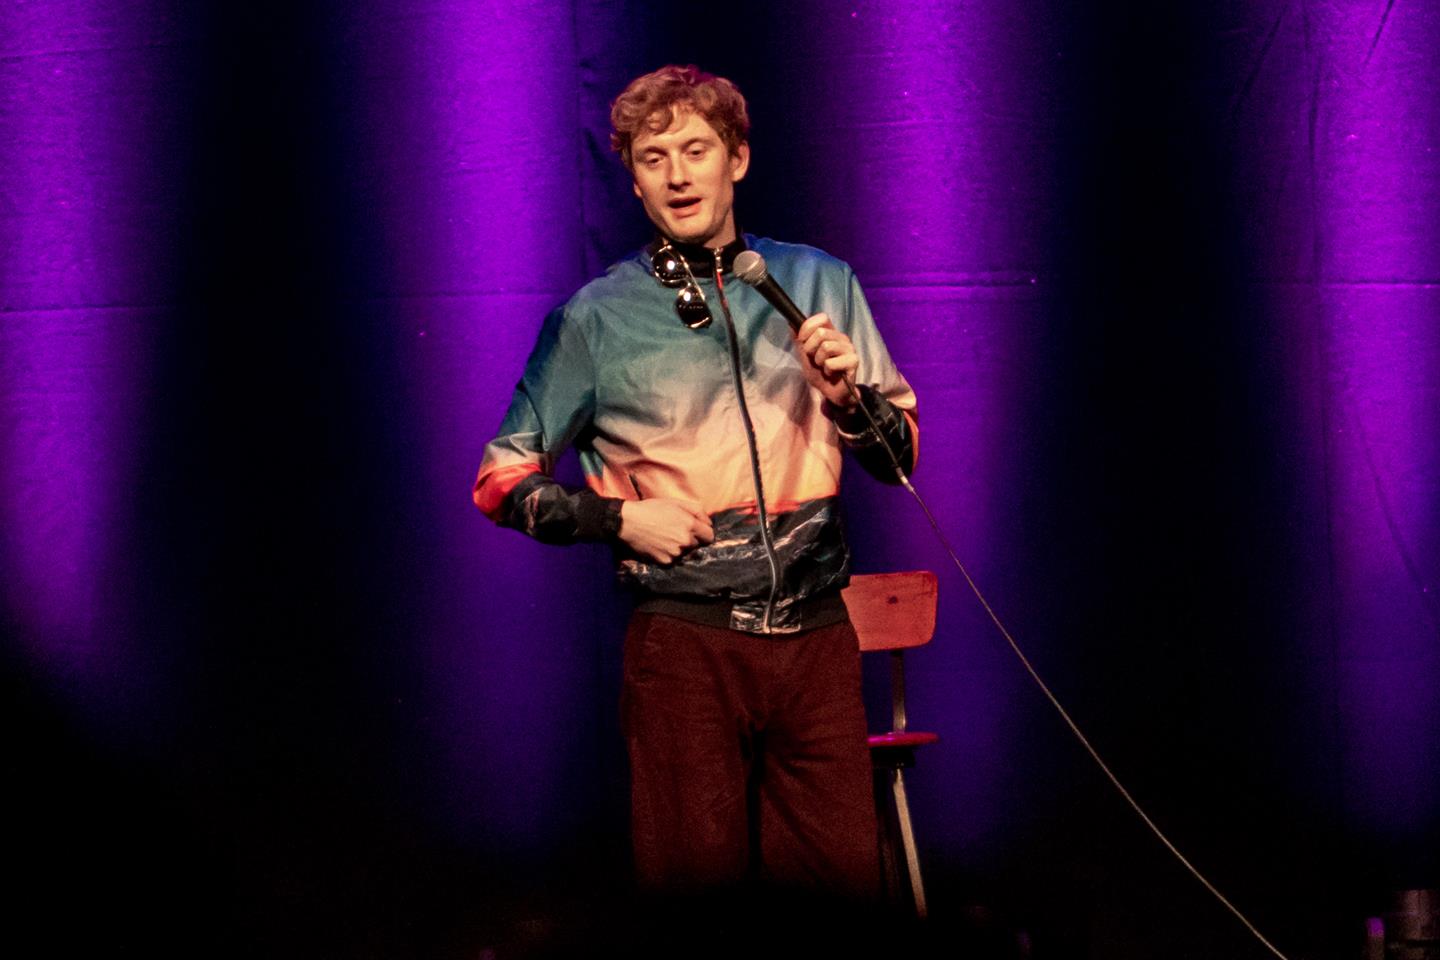 James Acaster Tickets Buy or Sell Tickets for James Acaster Tour